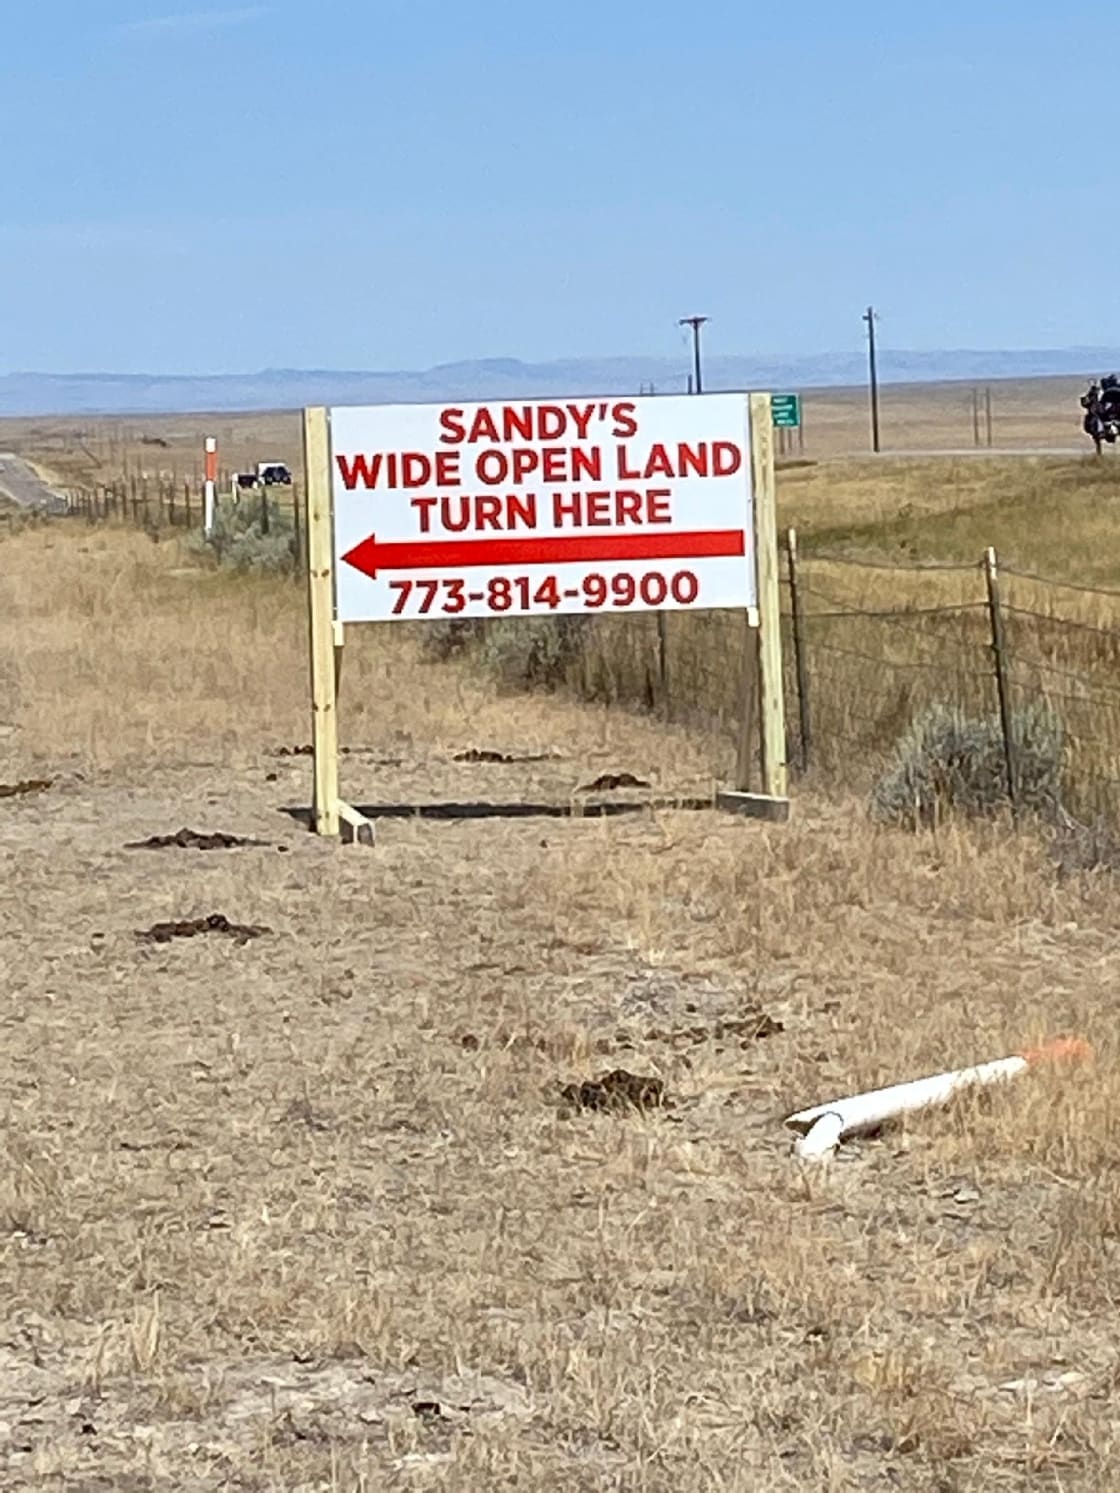 Please look for and follow these
Directional Signs to
Sandy's Wide open Land,
Camping
Take Highway 20/26 West From Casper Wyoming to Mile Marker 23
Then Turn Left At Giant Cell Tower
Down Gravel Road
Follow signs to Sandy's Wide Open Land